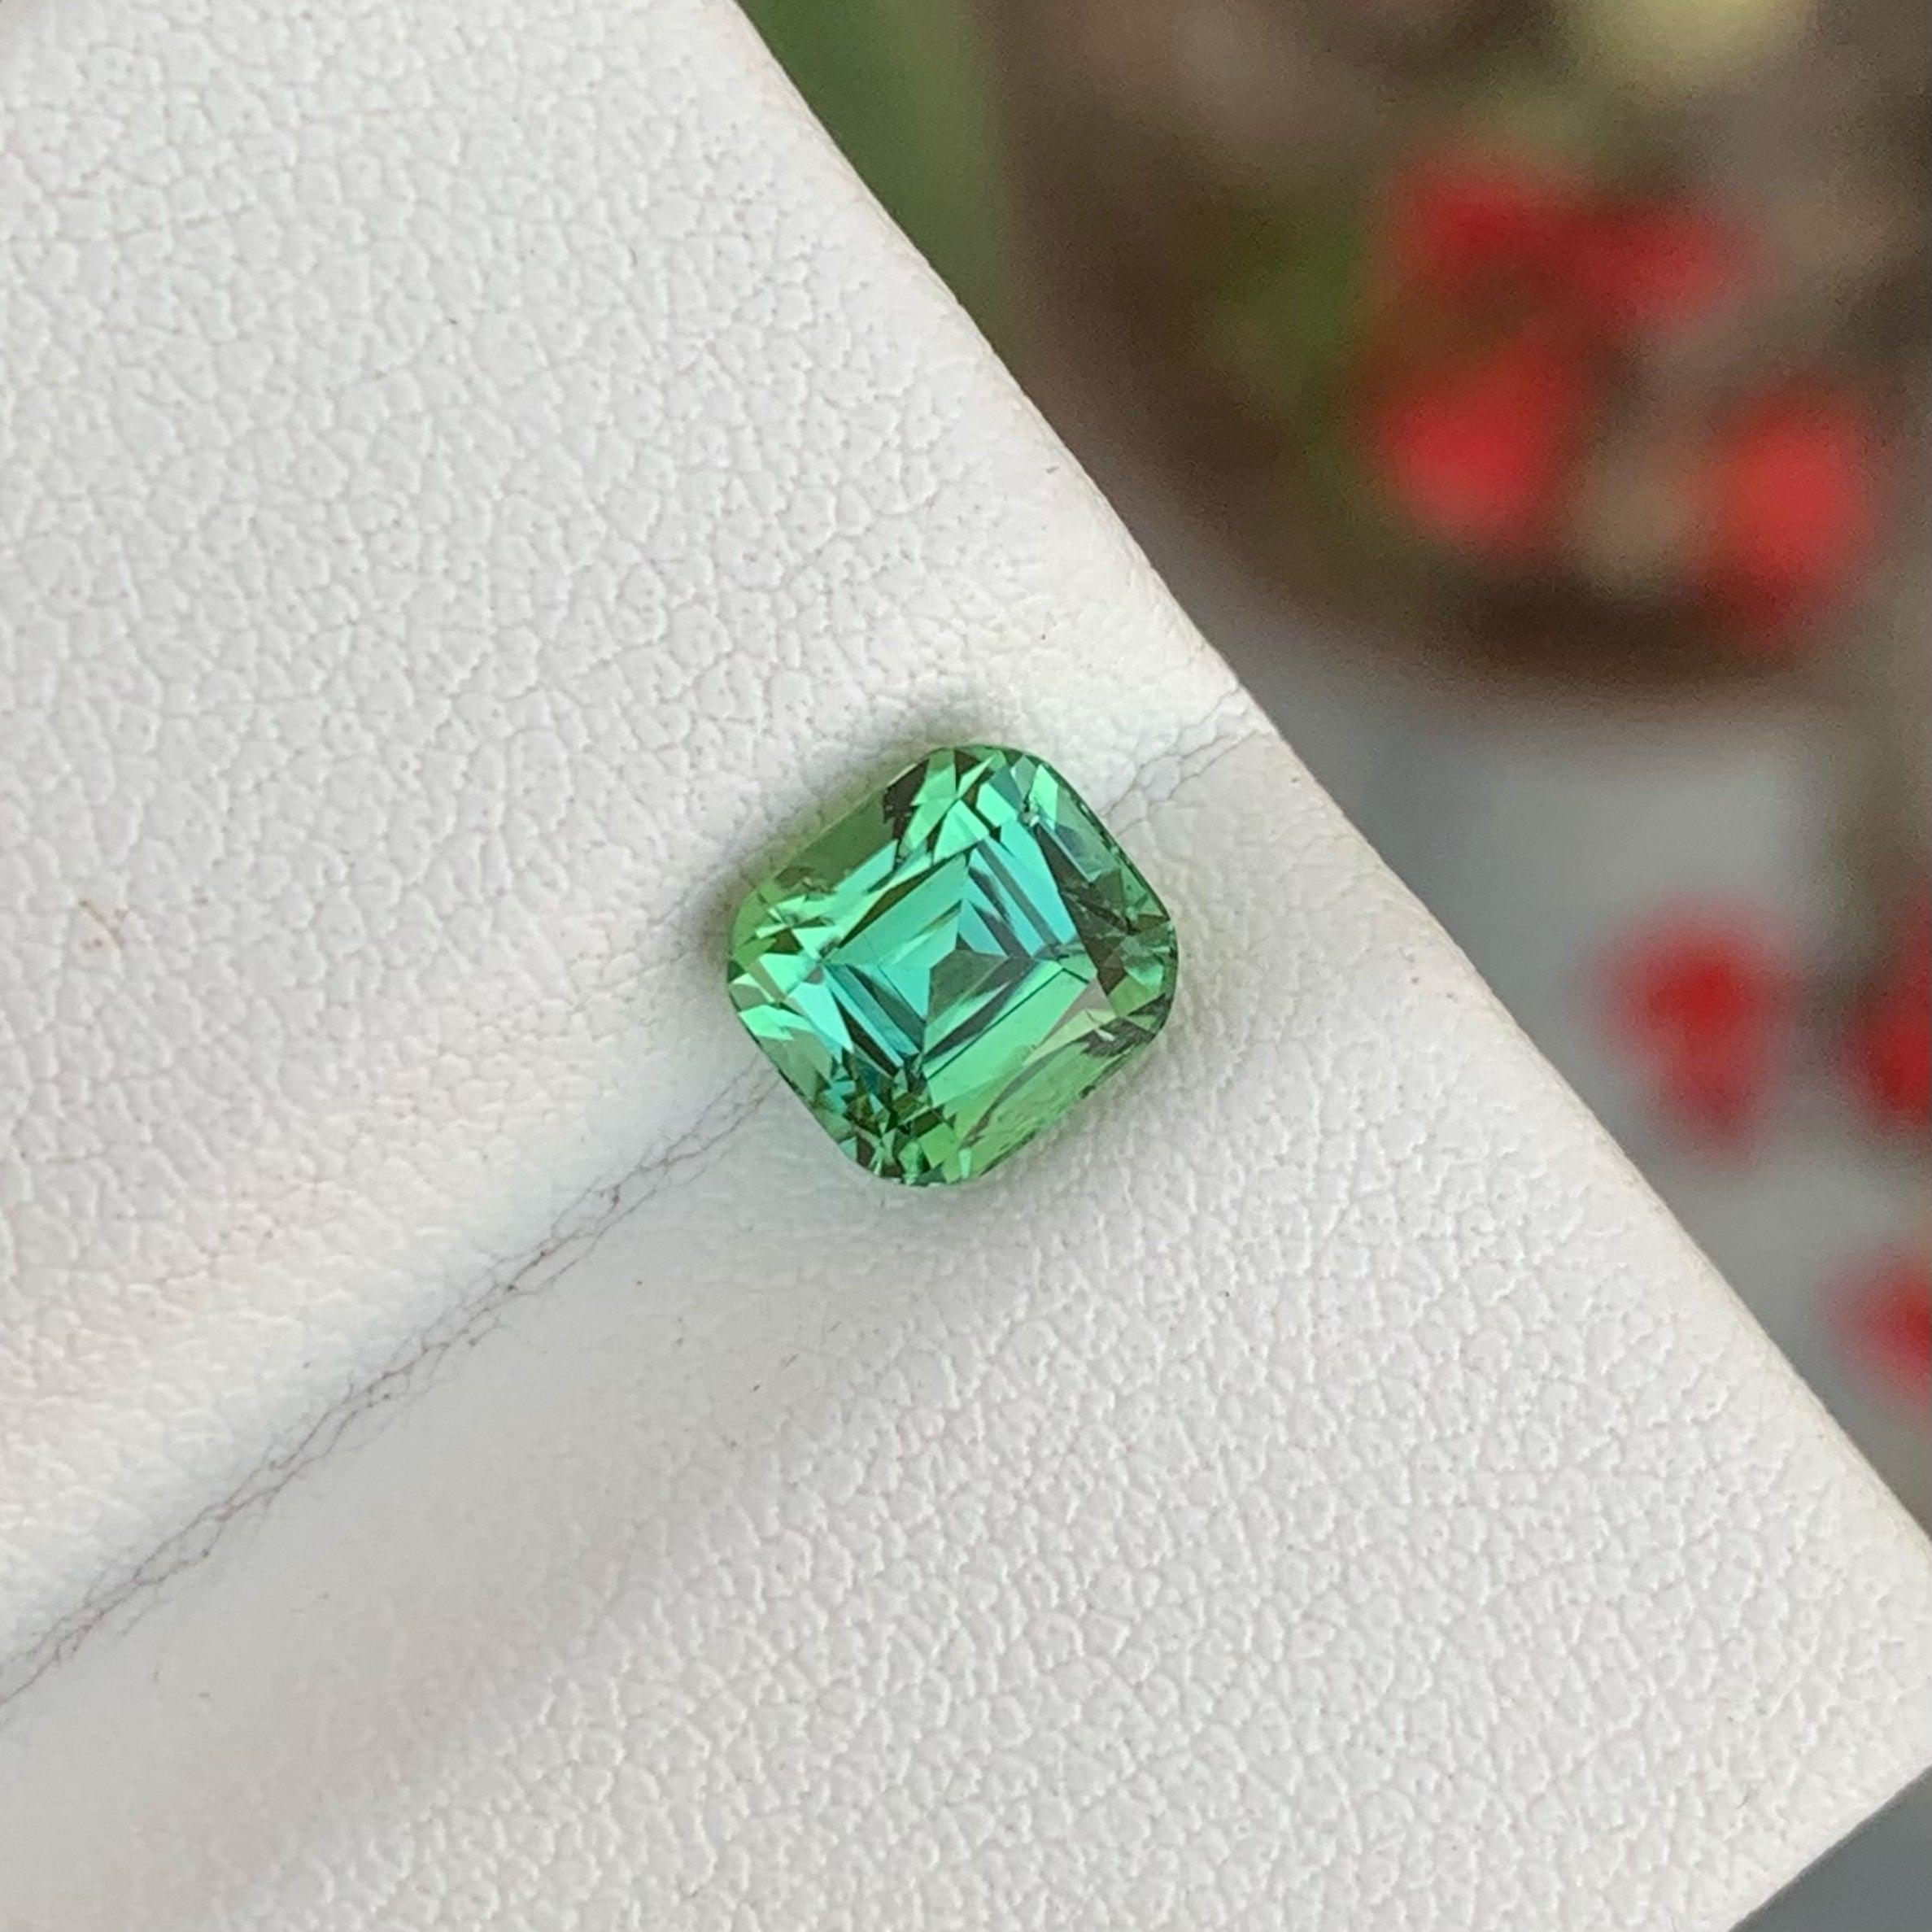 Exceptional Mint Green Tourmaline Stone, available for sale at wholesale price natural high quality 1.55 Carats Loose Tourmaline From Afghanistan.

Product Information:
GEMSTONE TYPE:	Exquisite Natural Green Tourmaline Gem
WEIGHT:	1.55